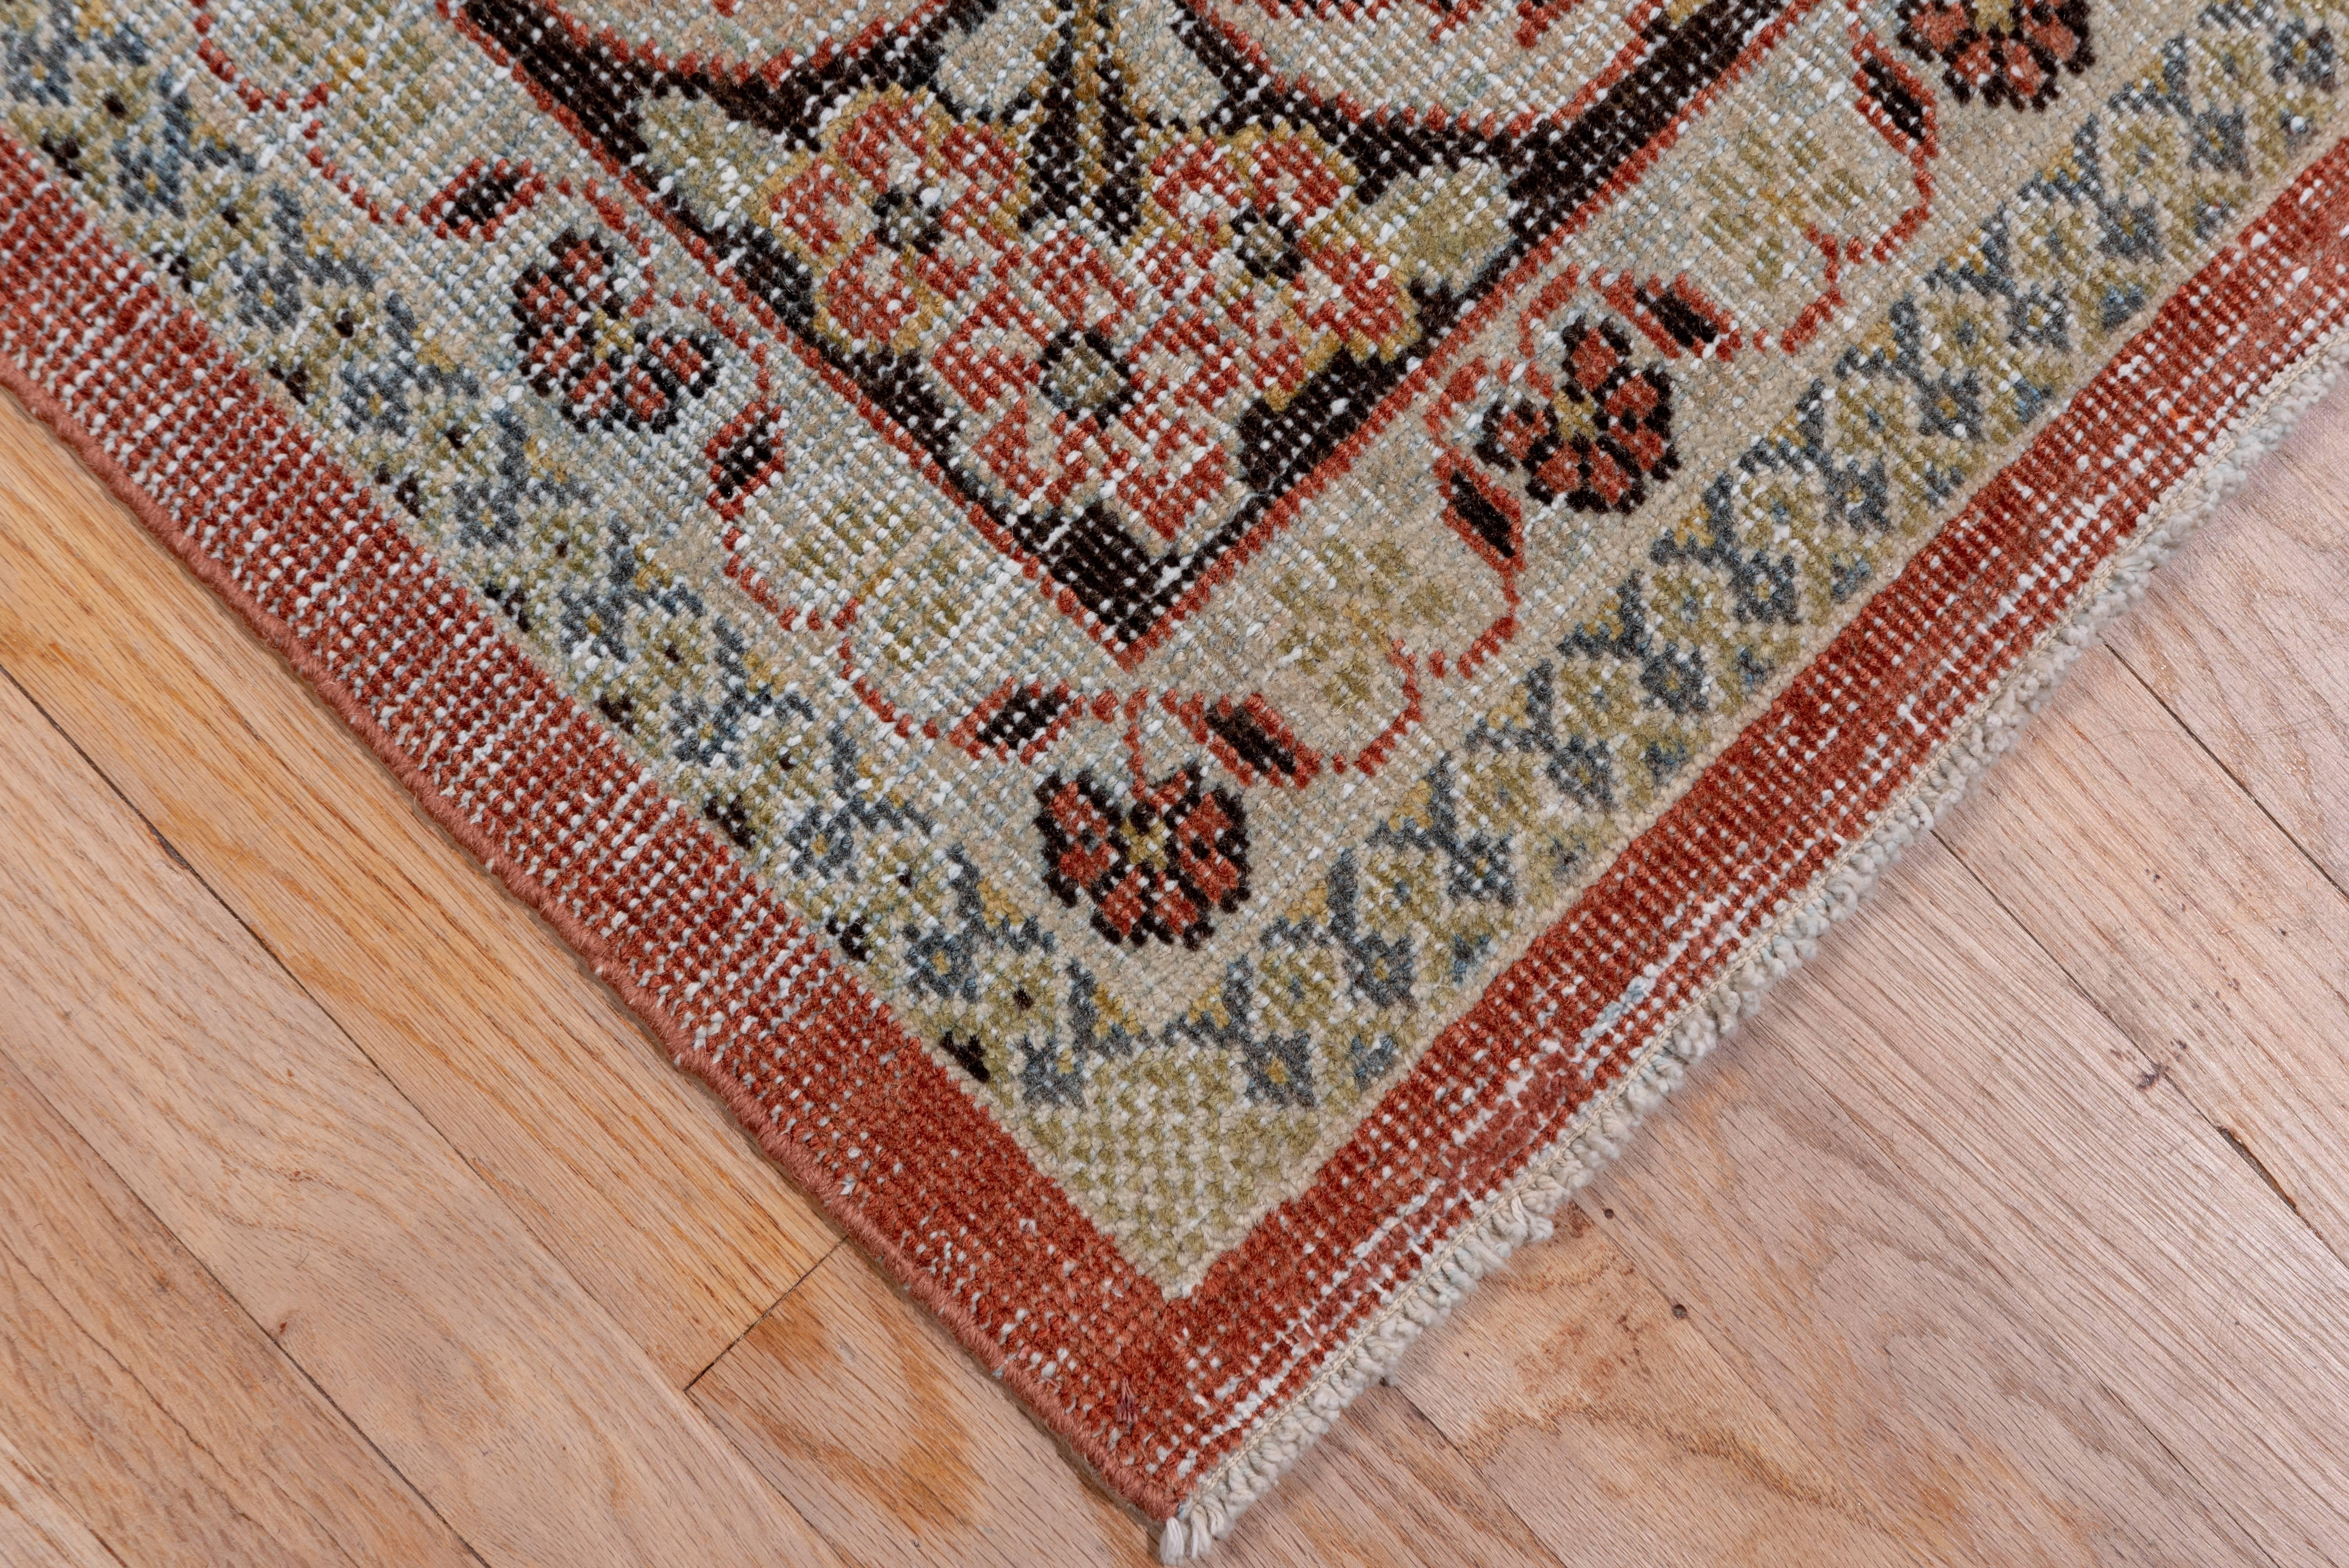 Hand-Knotted Tribal Antique Mahal Carpet